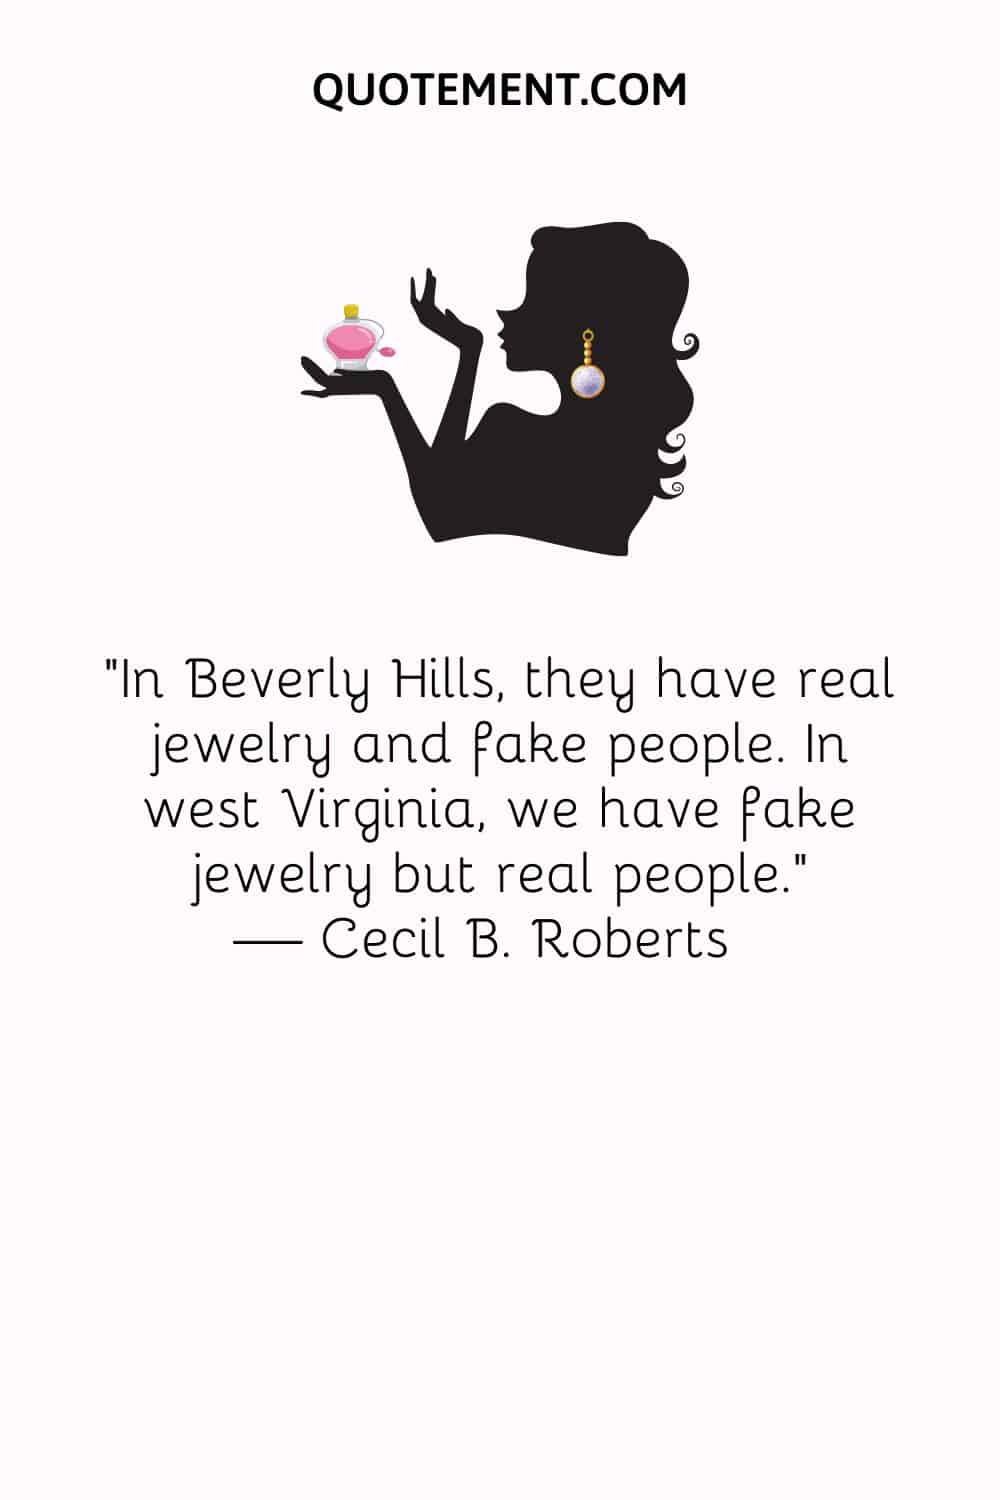 In Beverly Hills, they have real jewelry and fake people